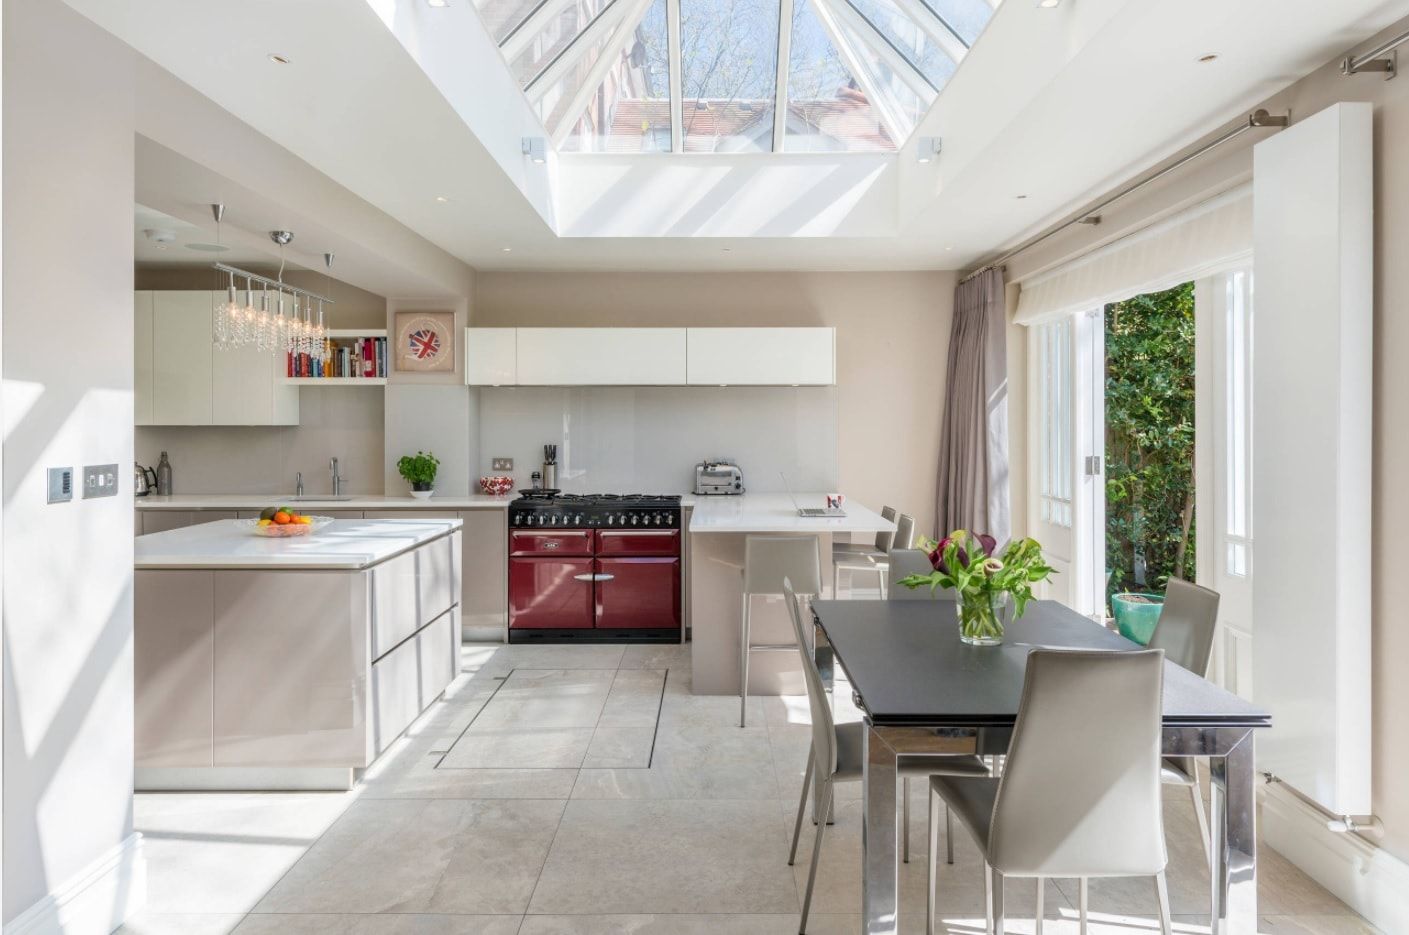 Skylight and the open terrace right at the kitchen with dining zone of the large house